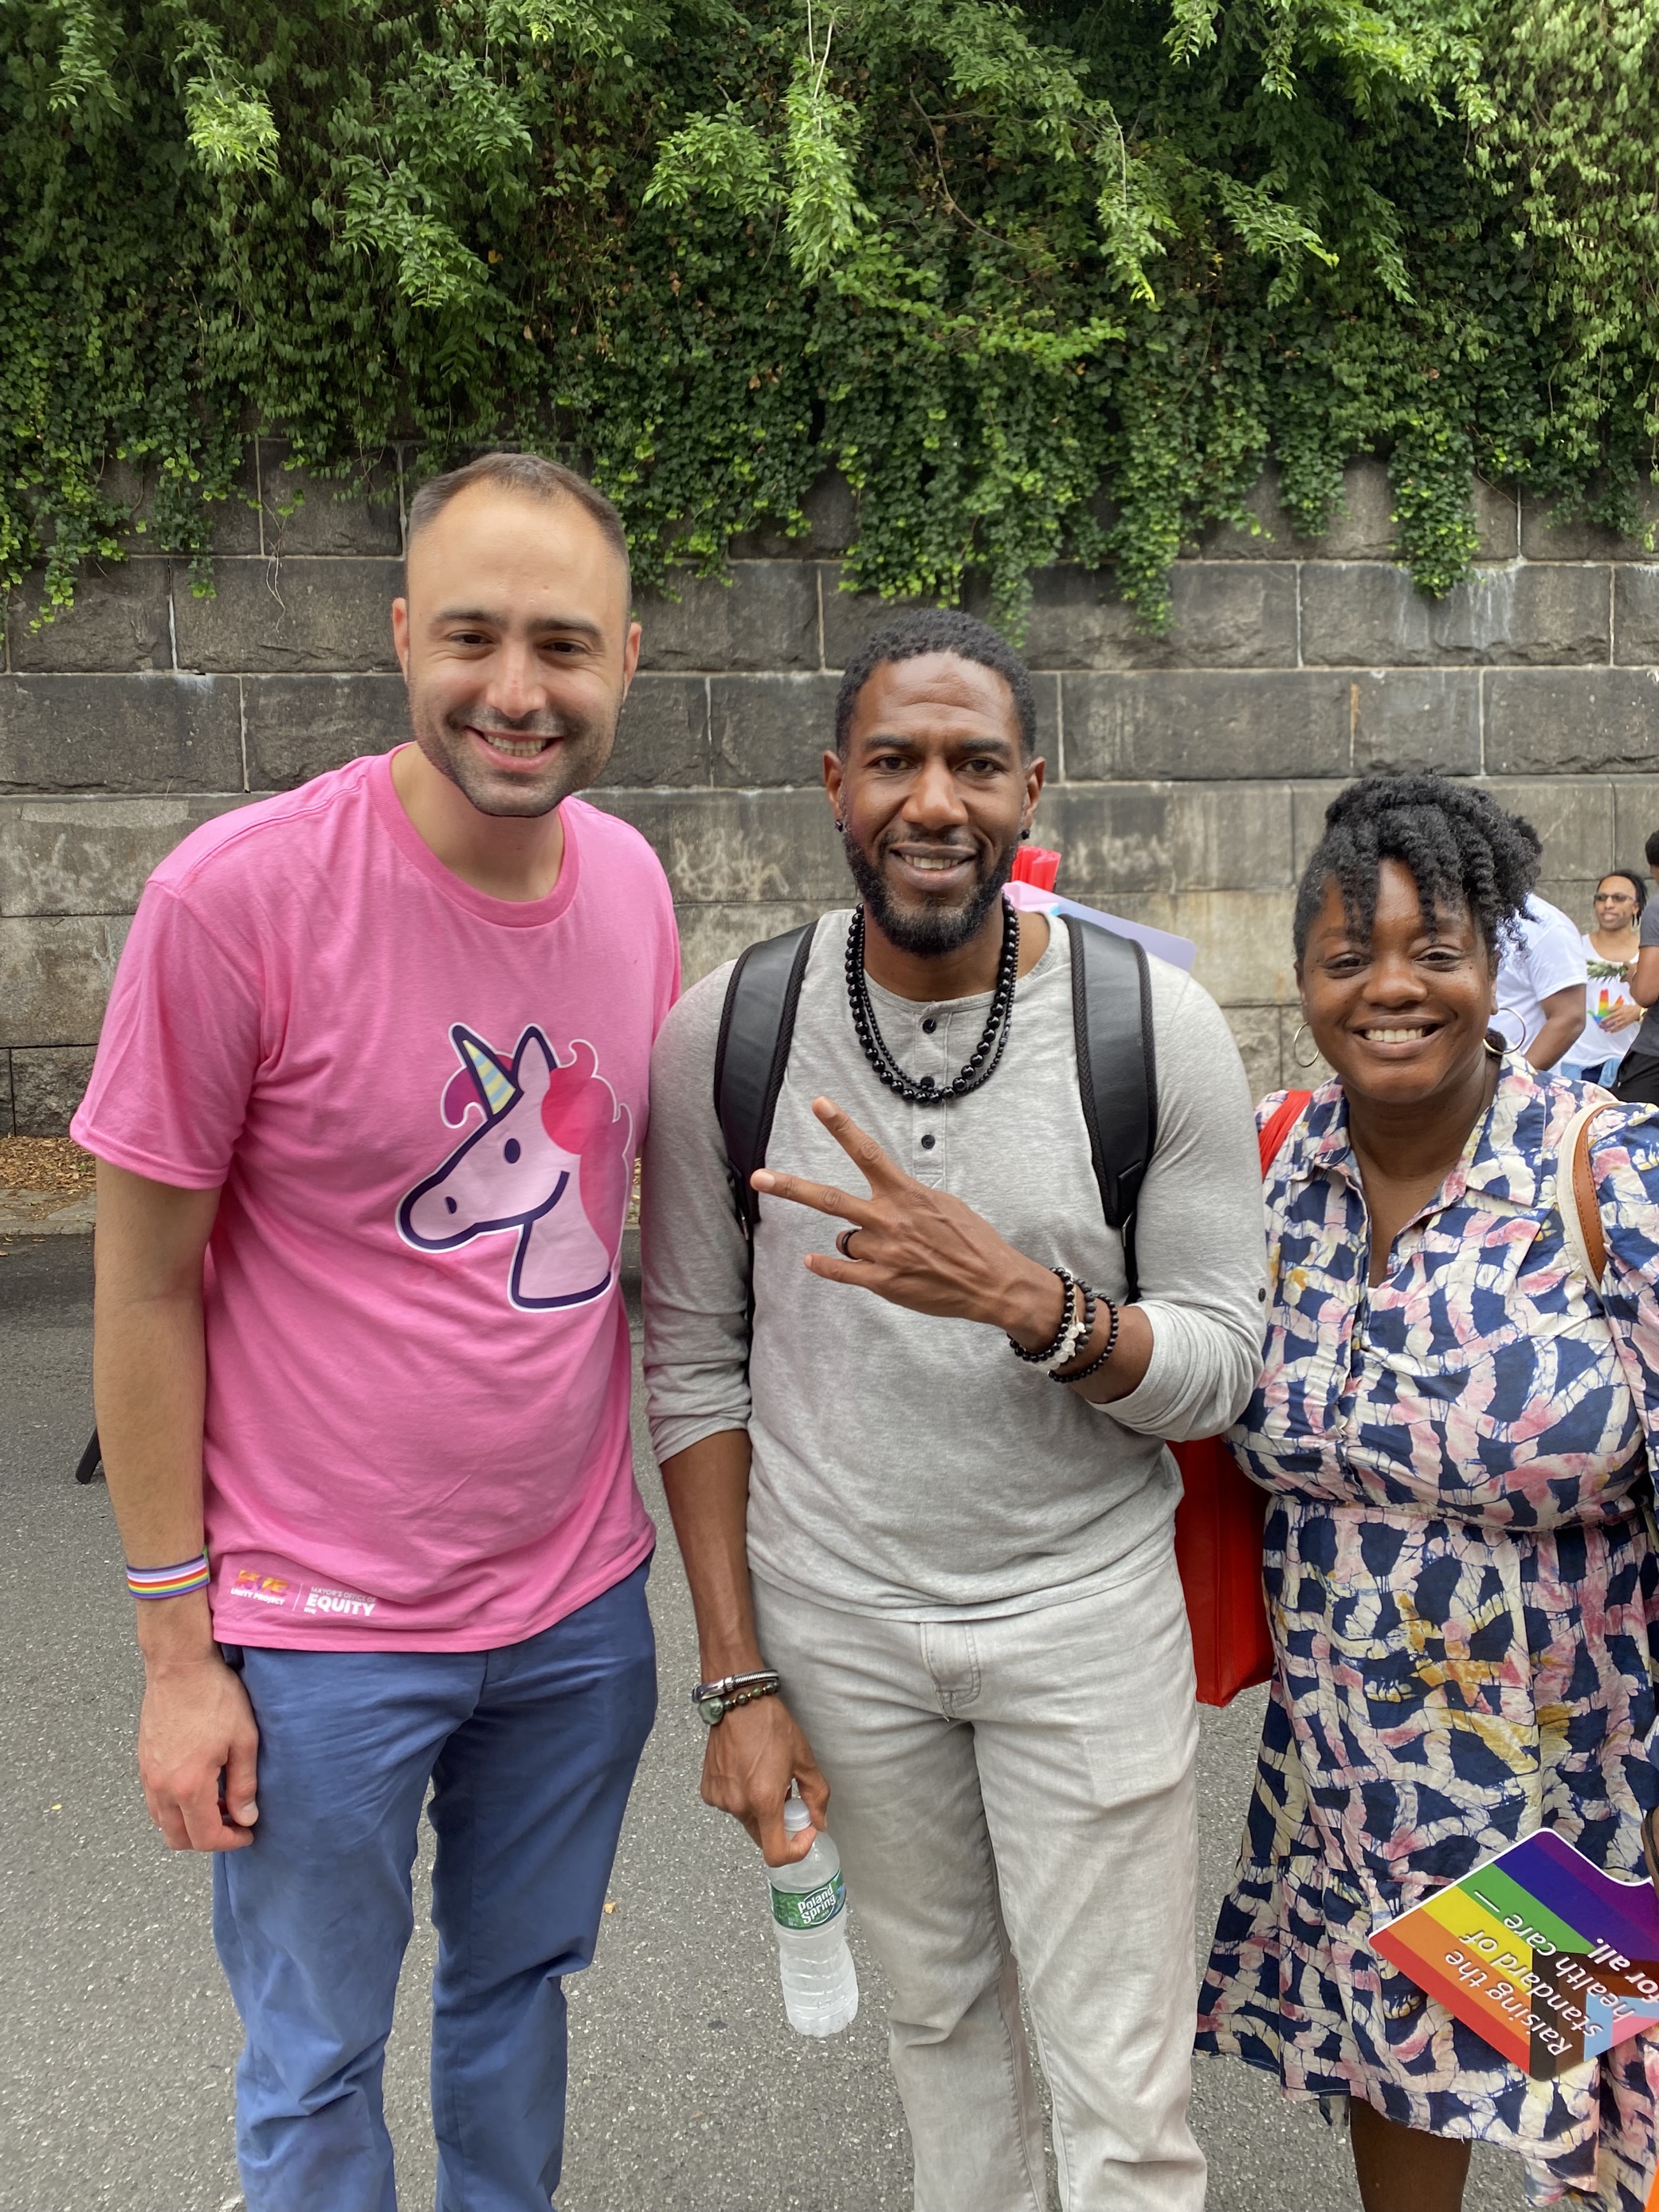 (From left to right) Acting Executive Director of the NYC Unity Project Ronald Porcelli, NYC Public Advocate Jumaane D. Williams and the NYC Mayor's Office of Equity Commissioner Sideya Sherman pose for a picture at Harlem Pride. 